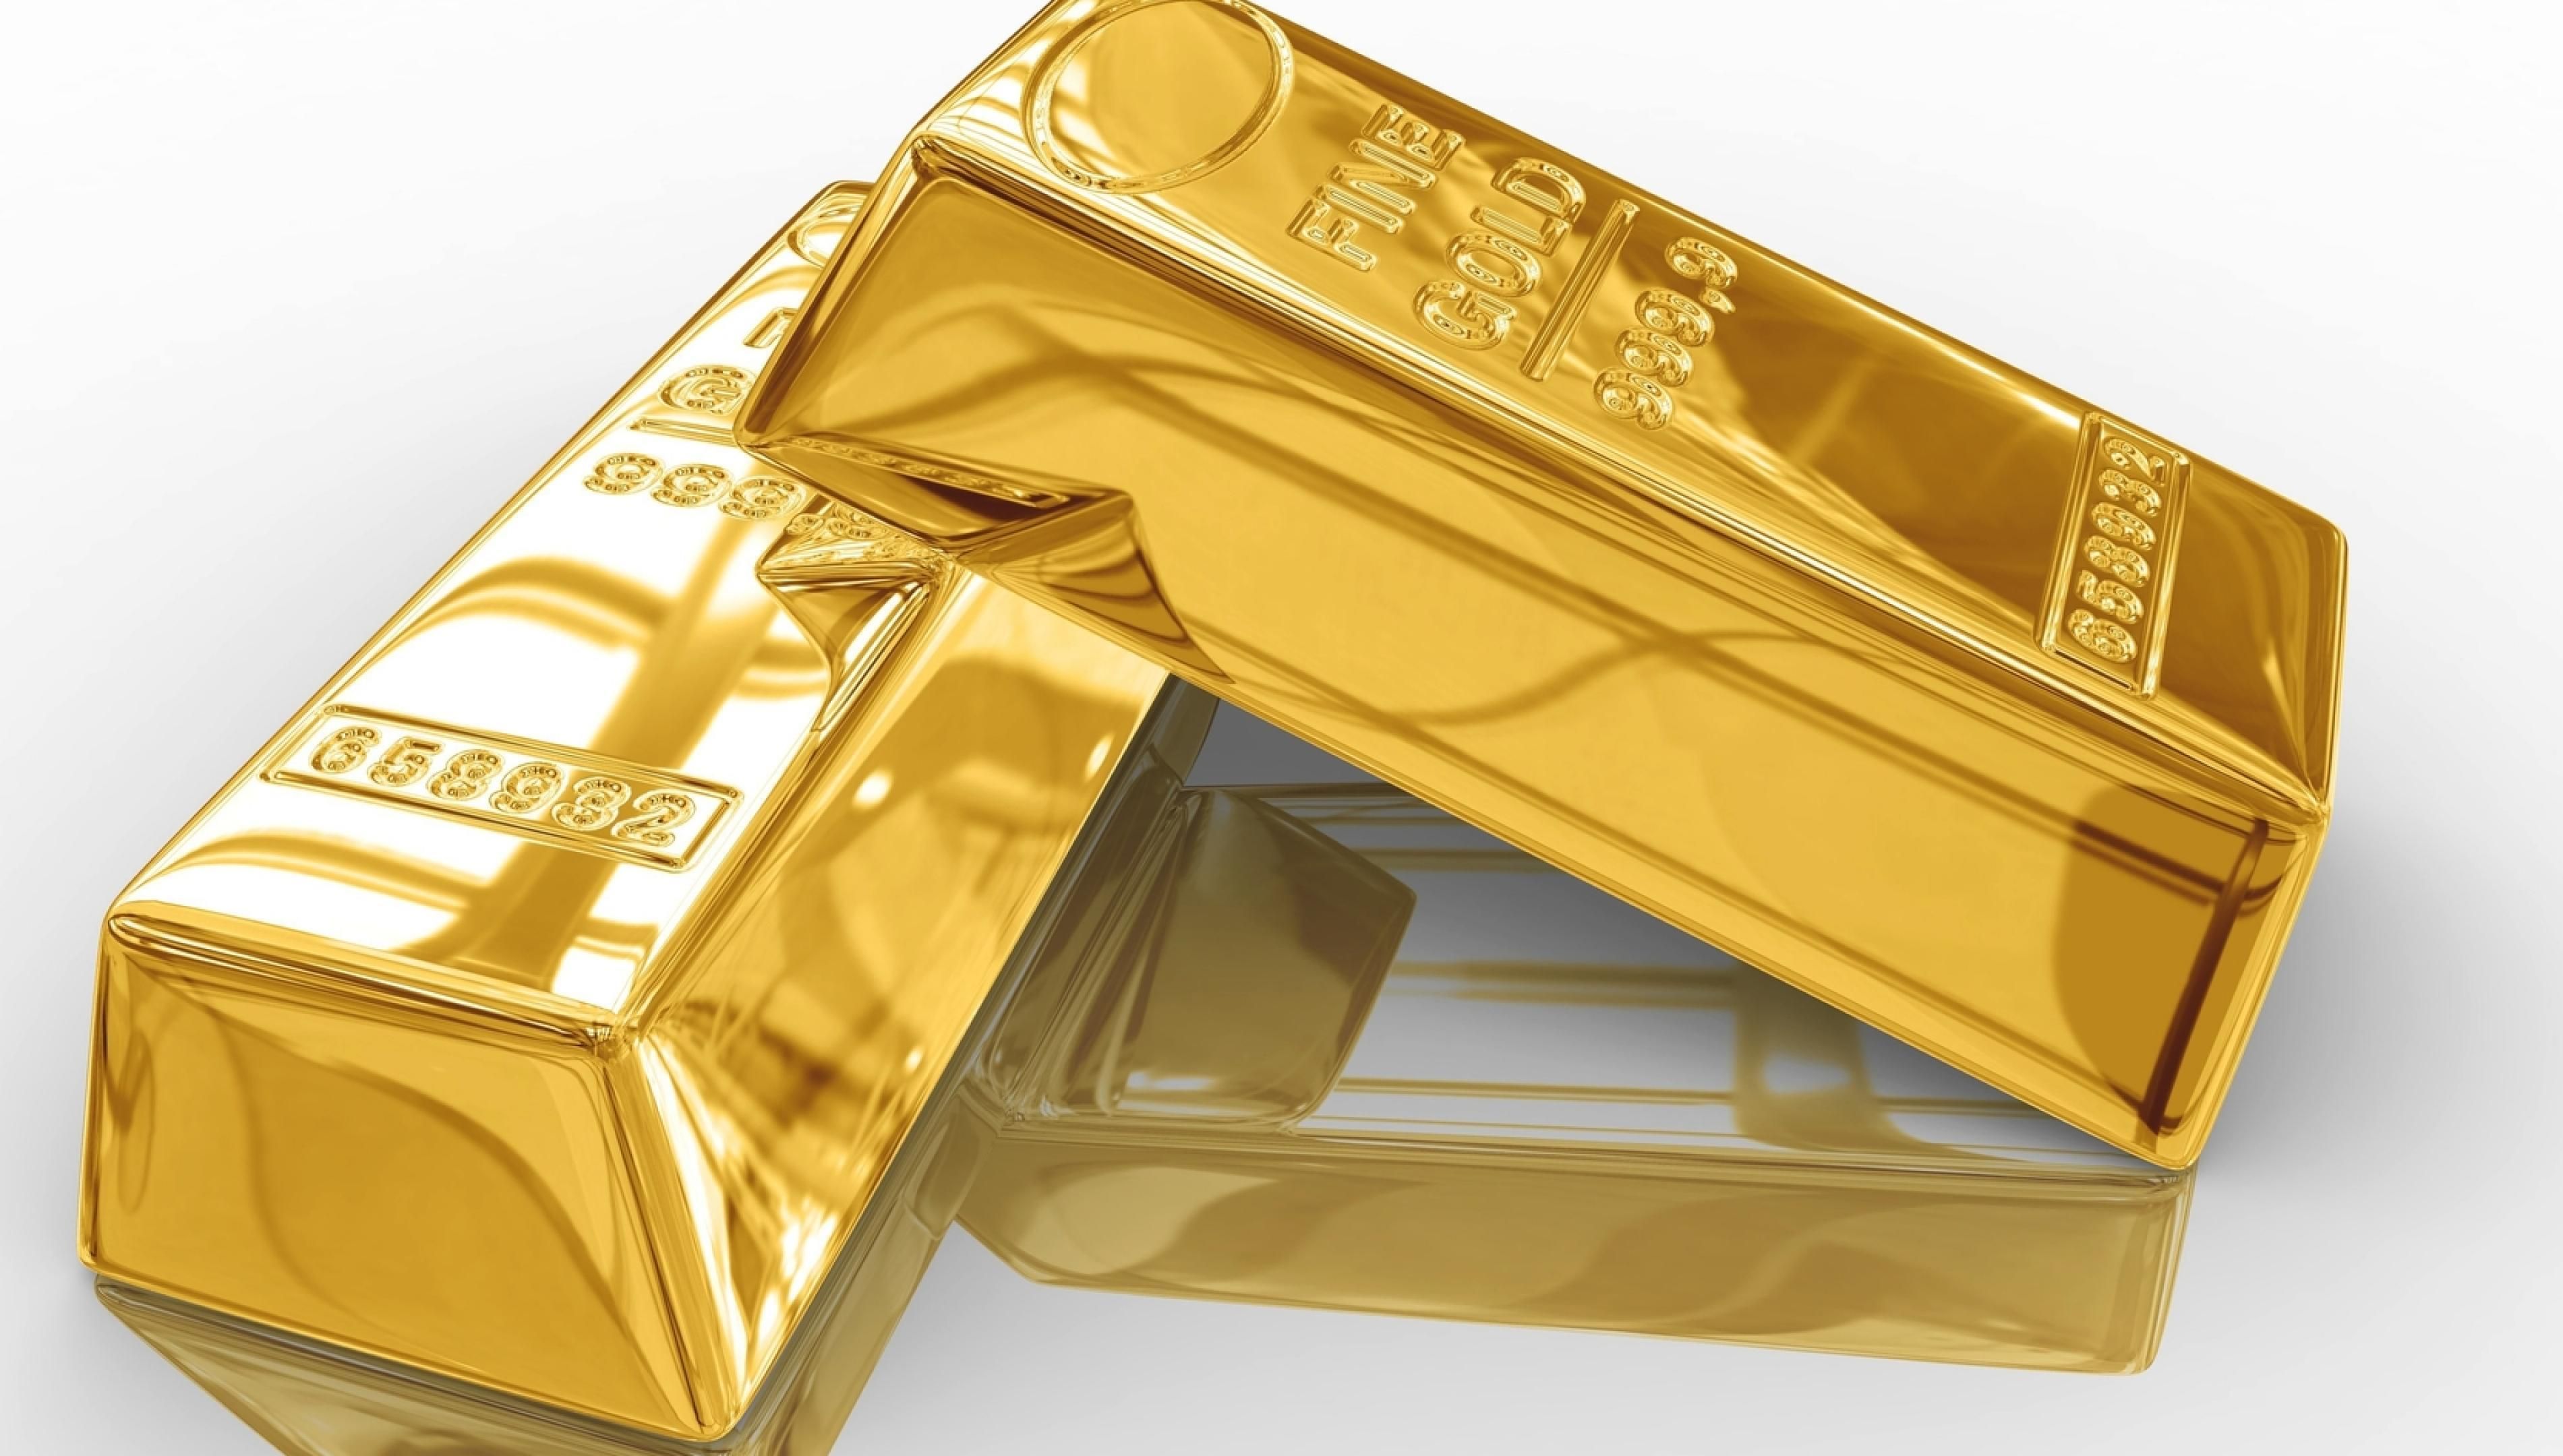 Two large gold bars are reflected in the surface. Desktop wallpaper 1024x768